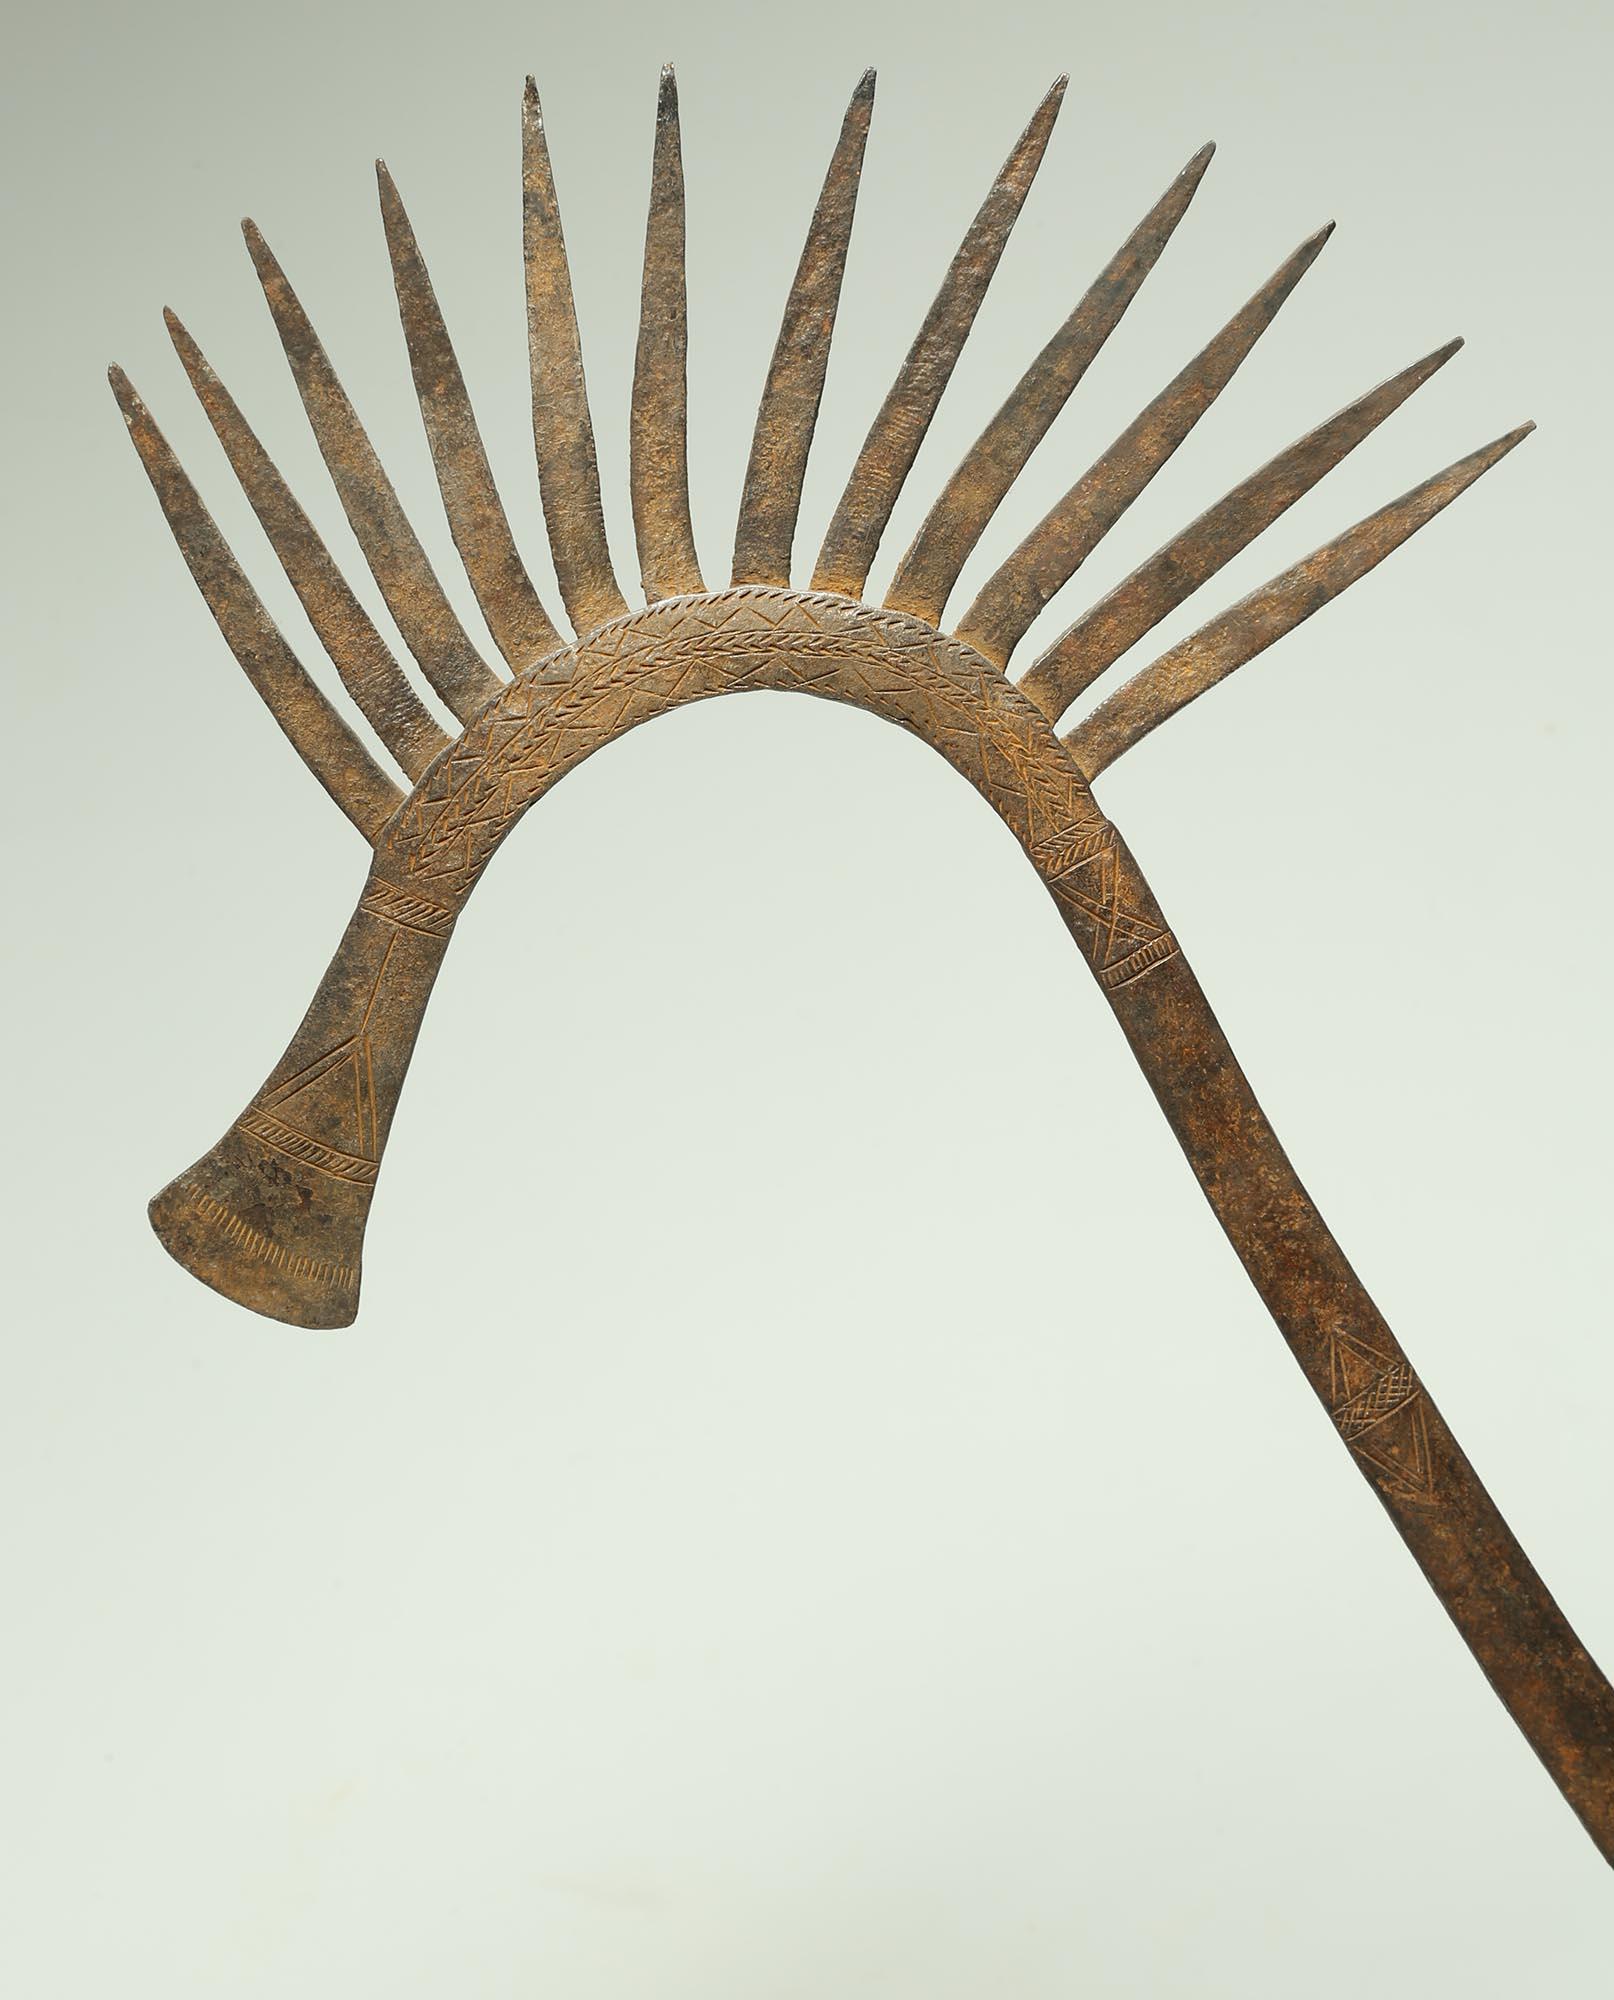 Forged iron currency object or staff in the form of a stylized fancy crested bird, from the Kirdi people, Nigeria. Added decoration on the surface in the form of fine incised lines. Created early 20th century, on custom metal base. Measures:  23